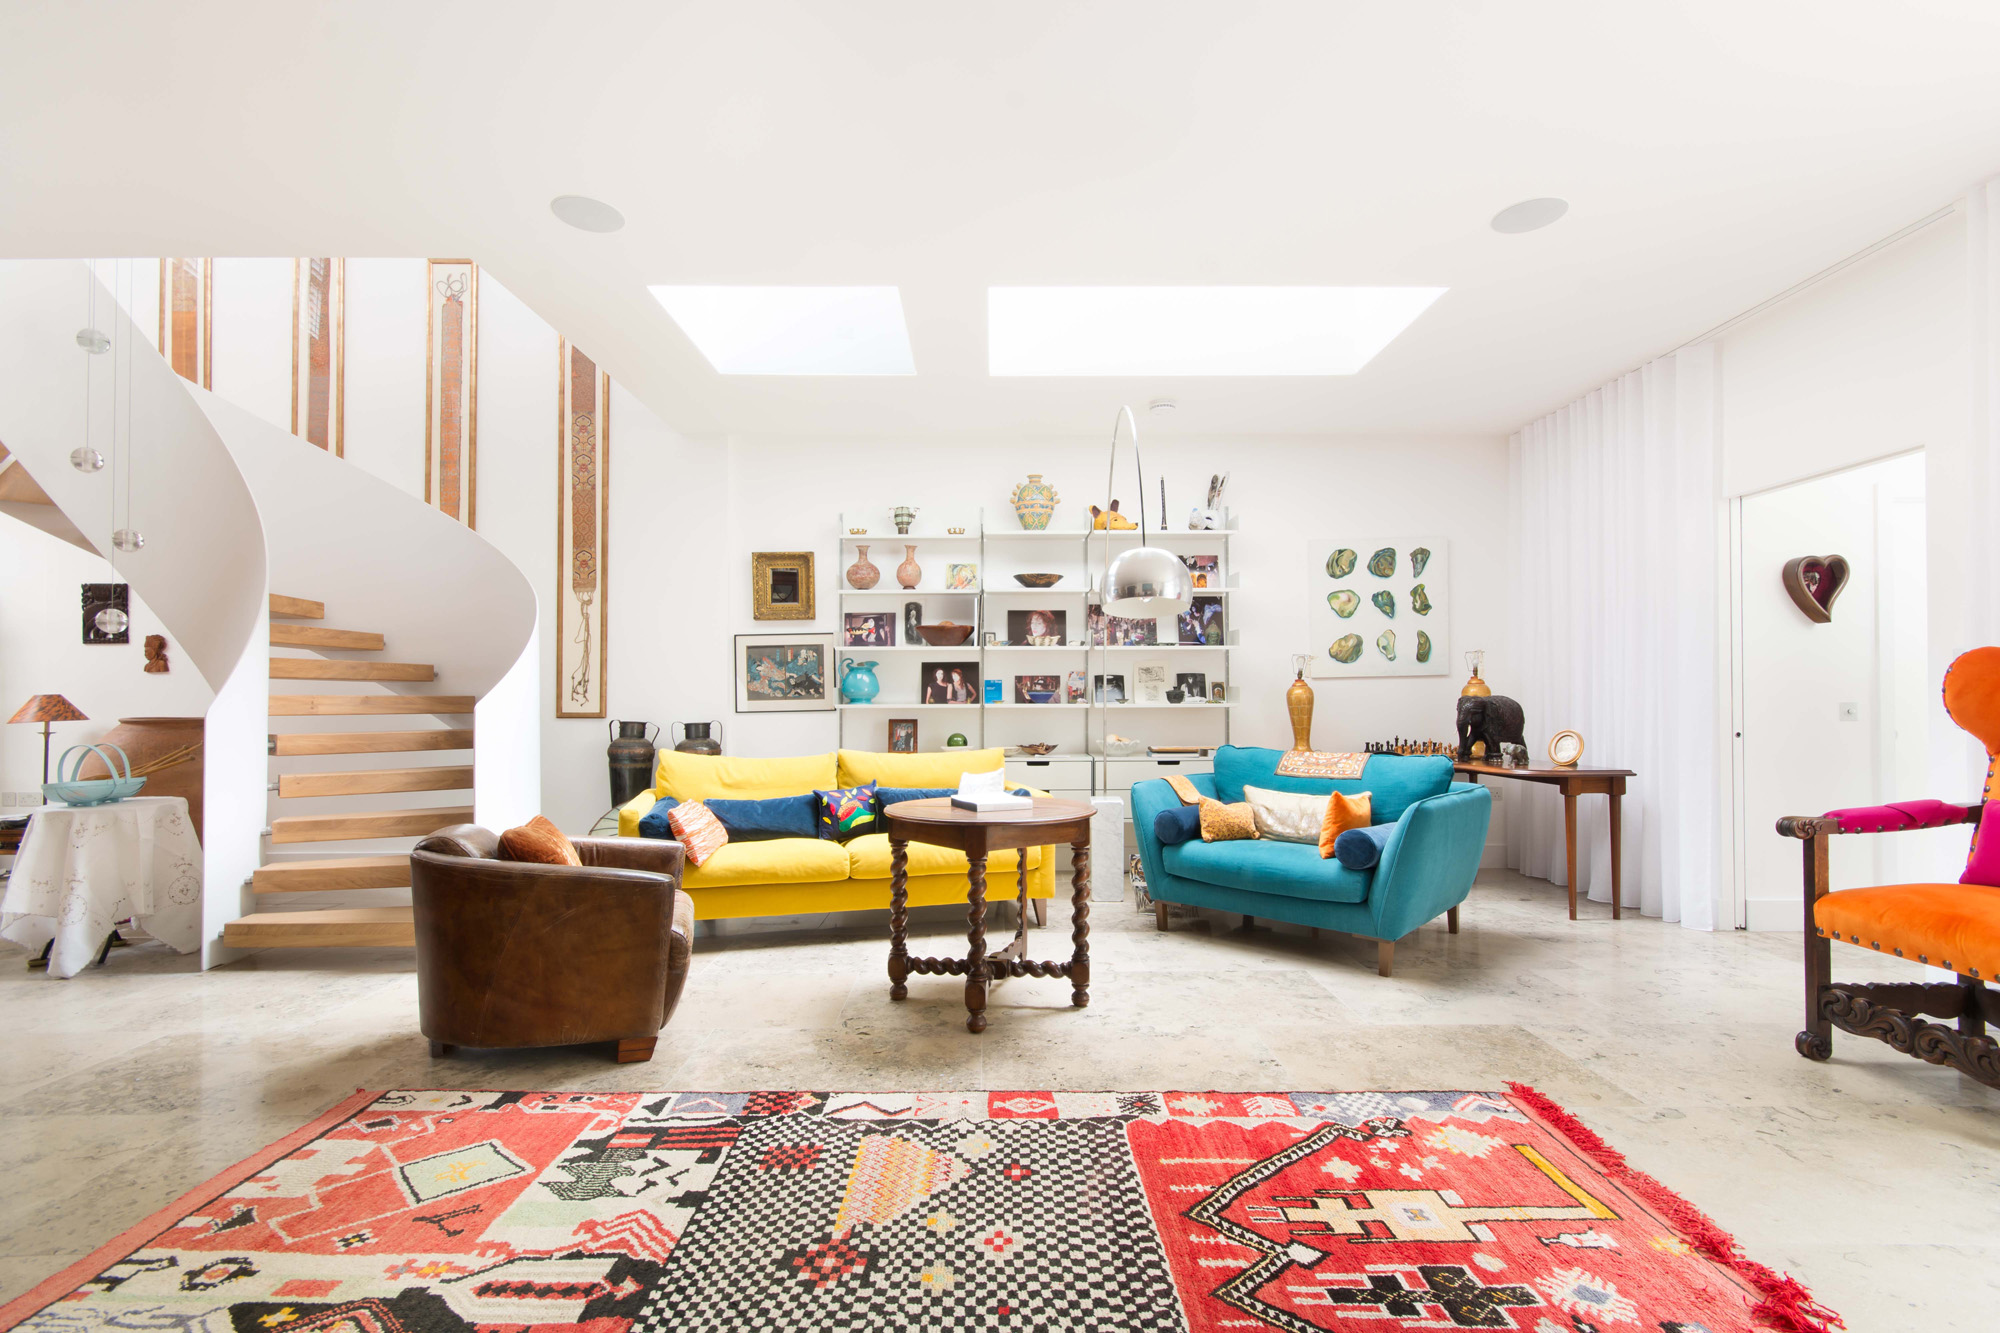 For Sale: St Stephen Yard Notting Hill W11 modern interior design with architectural staircase